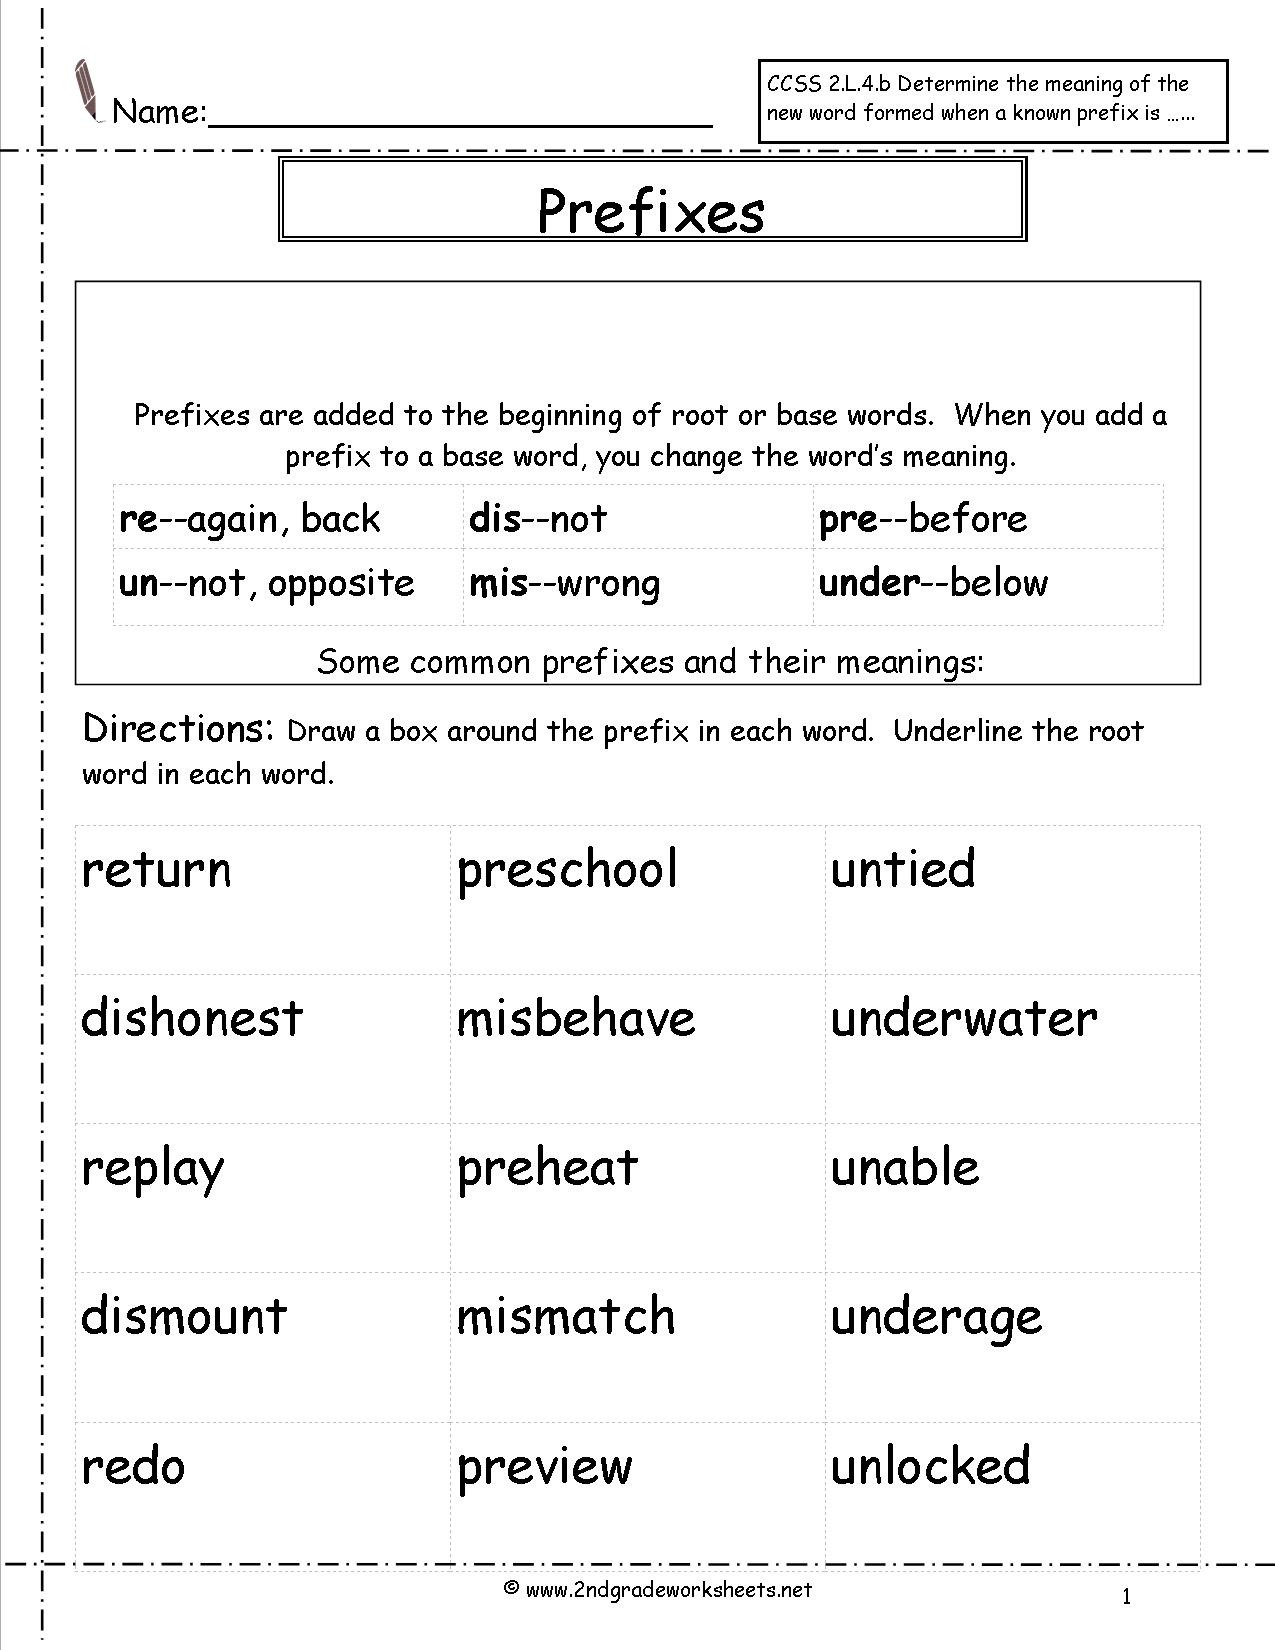 suffixes worksheets pdf db excelcom